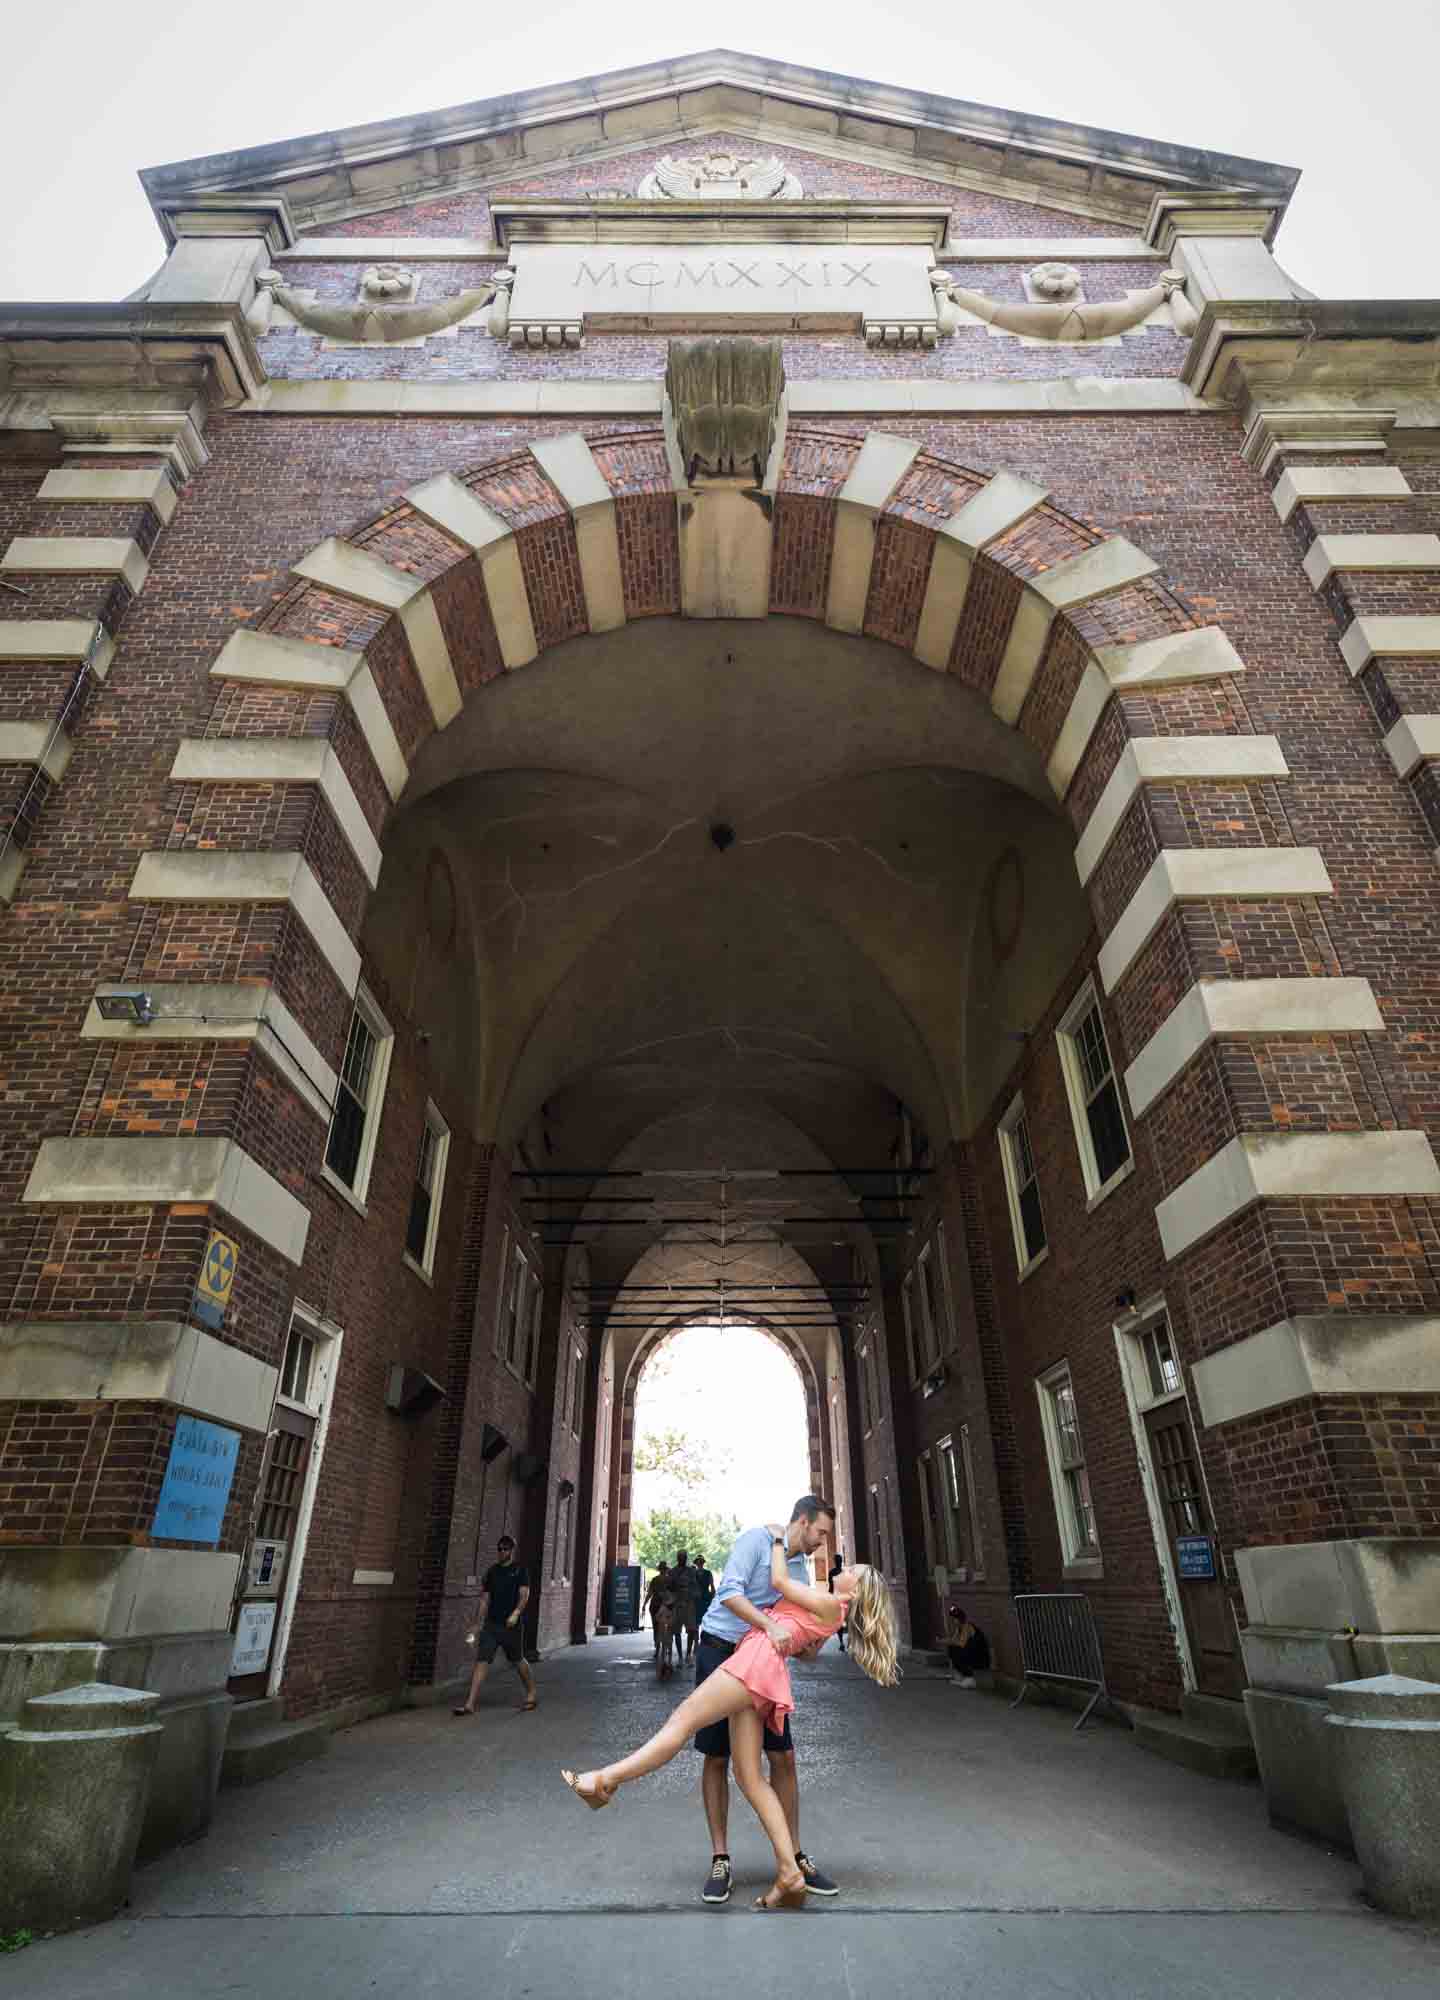 Couple dancing under Liggett Terrace archway for an article on how to propose on Governors Island